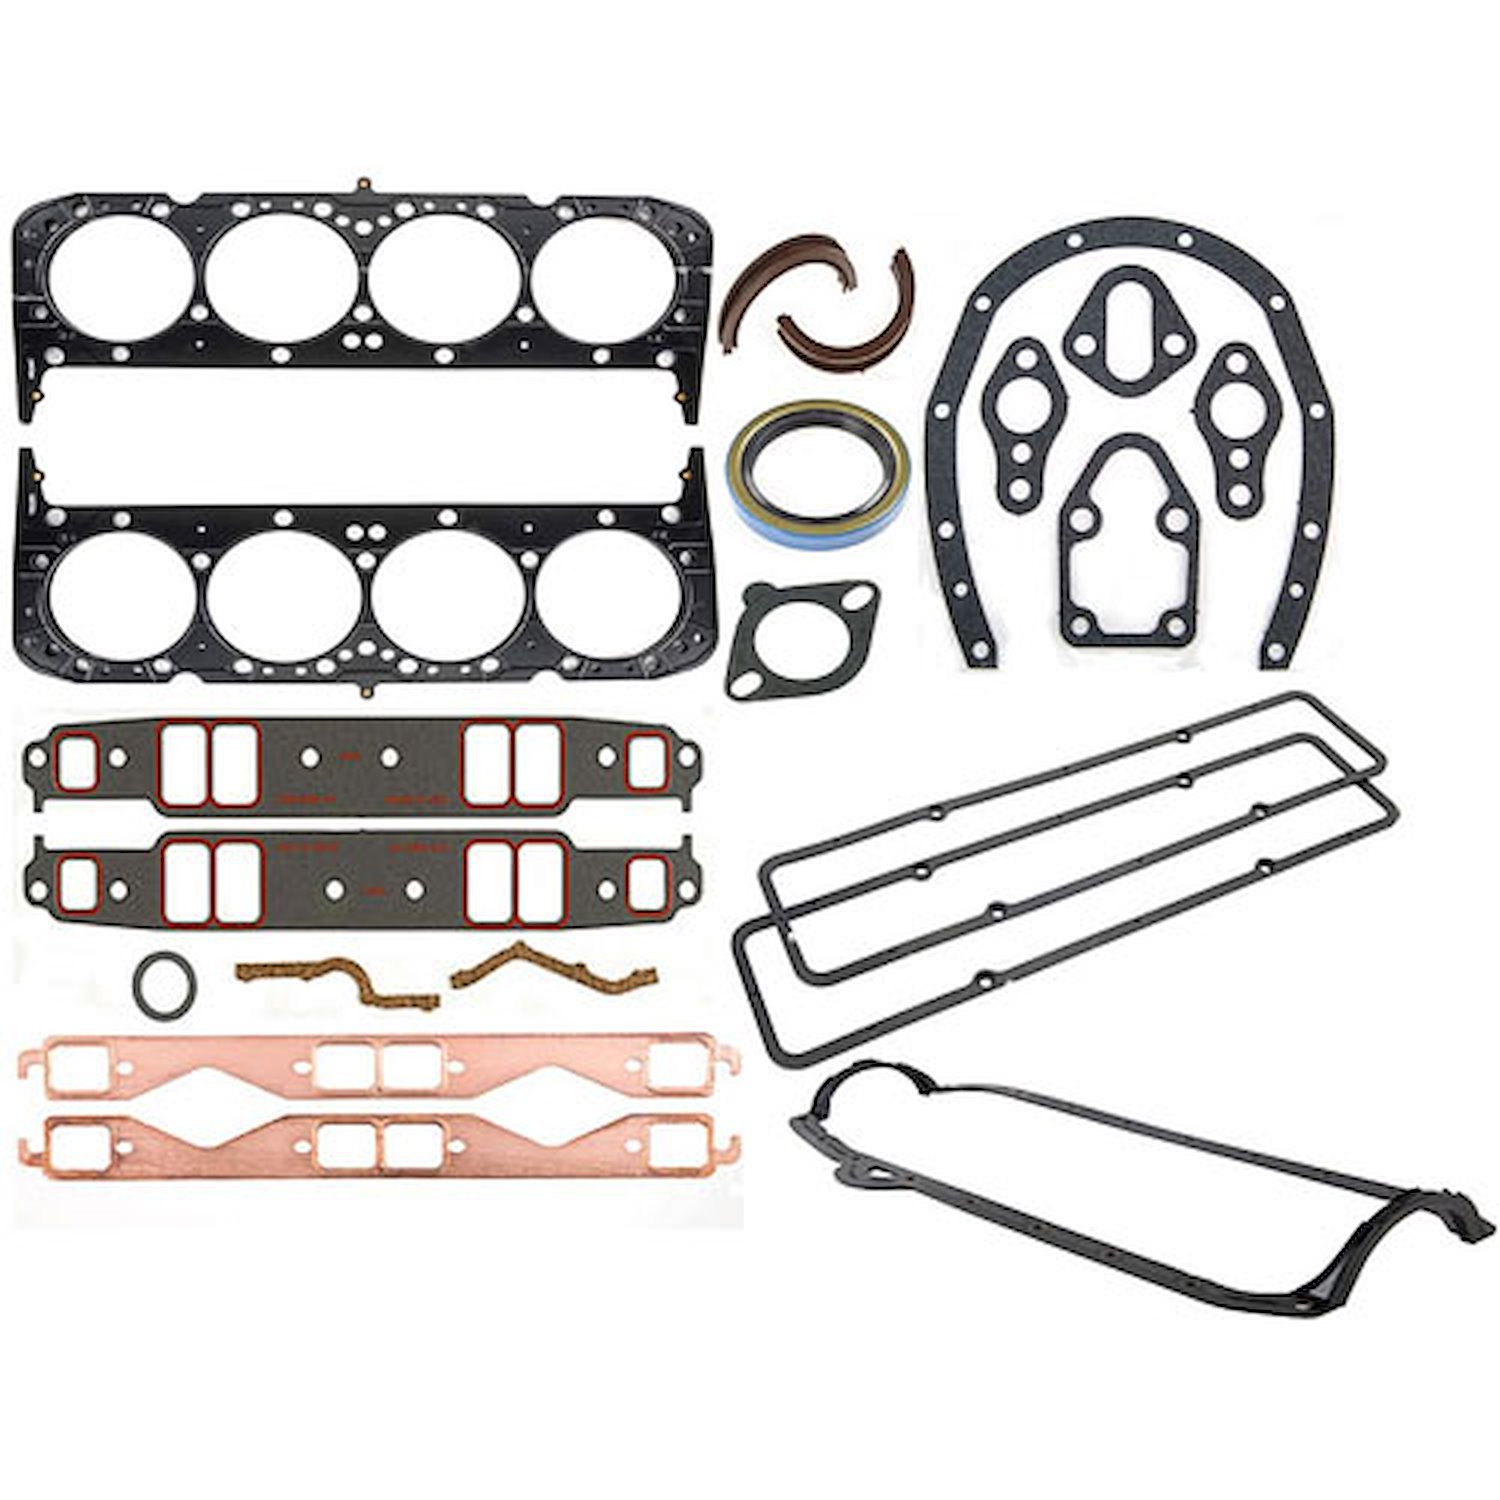 Gasket Kit for 1967-1980 Small Block Chevy 265-350 (except 305)